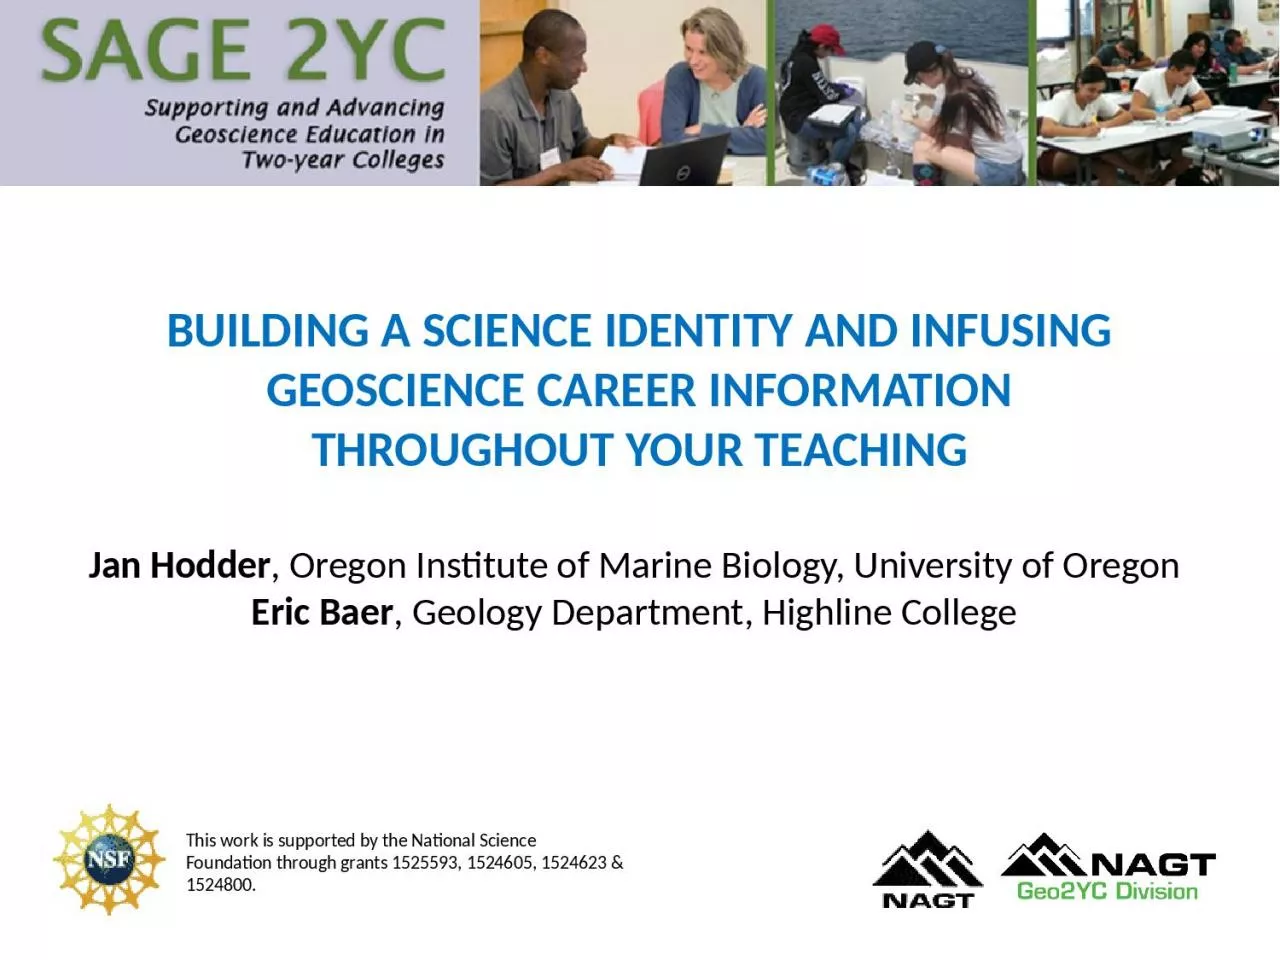 BUILDING A SCIENCE IDENTITY AND INFUSING GEOSCIENCE CAREER INFORMATION THROUGHOUT YOUR